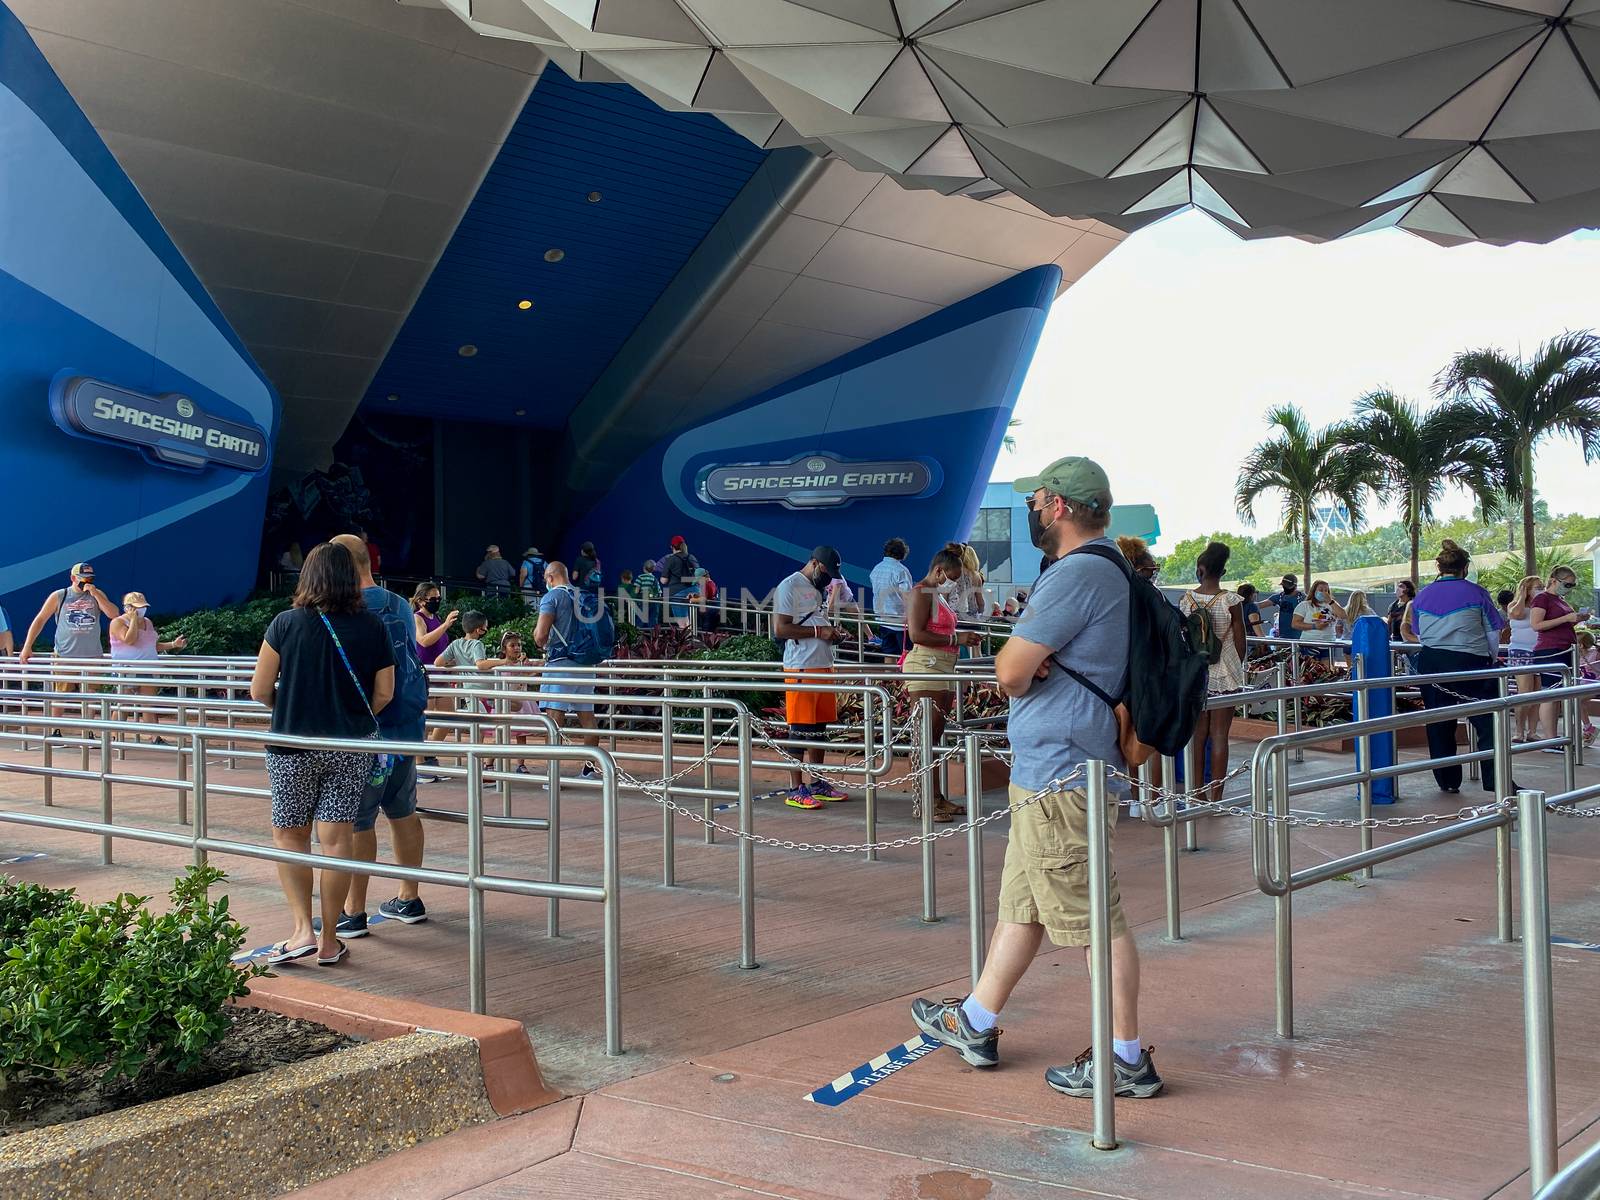 Orlando,FL/USA-10/17/20: People wearing masks and social distancing while in line to enter the Spaceship Earth theme park ride at Disney World EPCOT park.